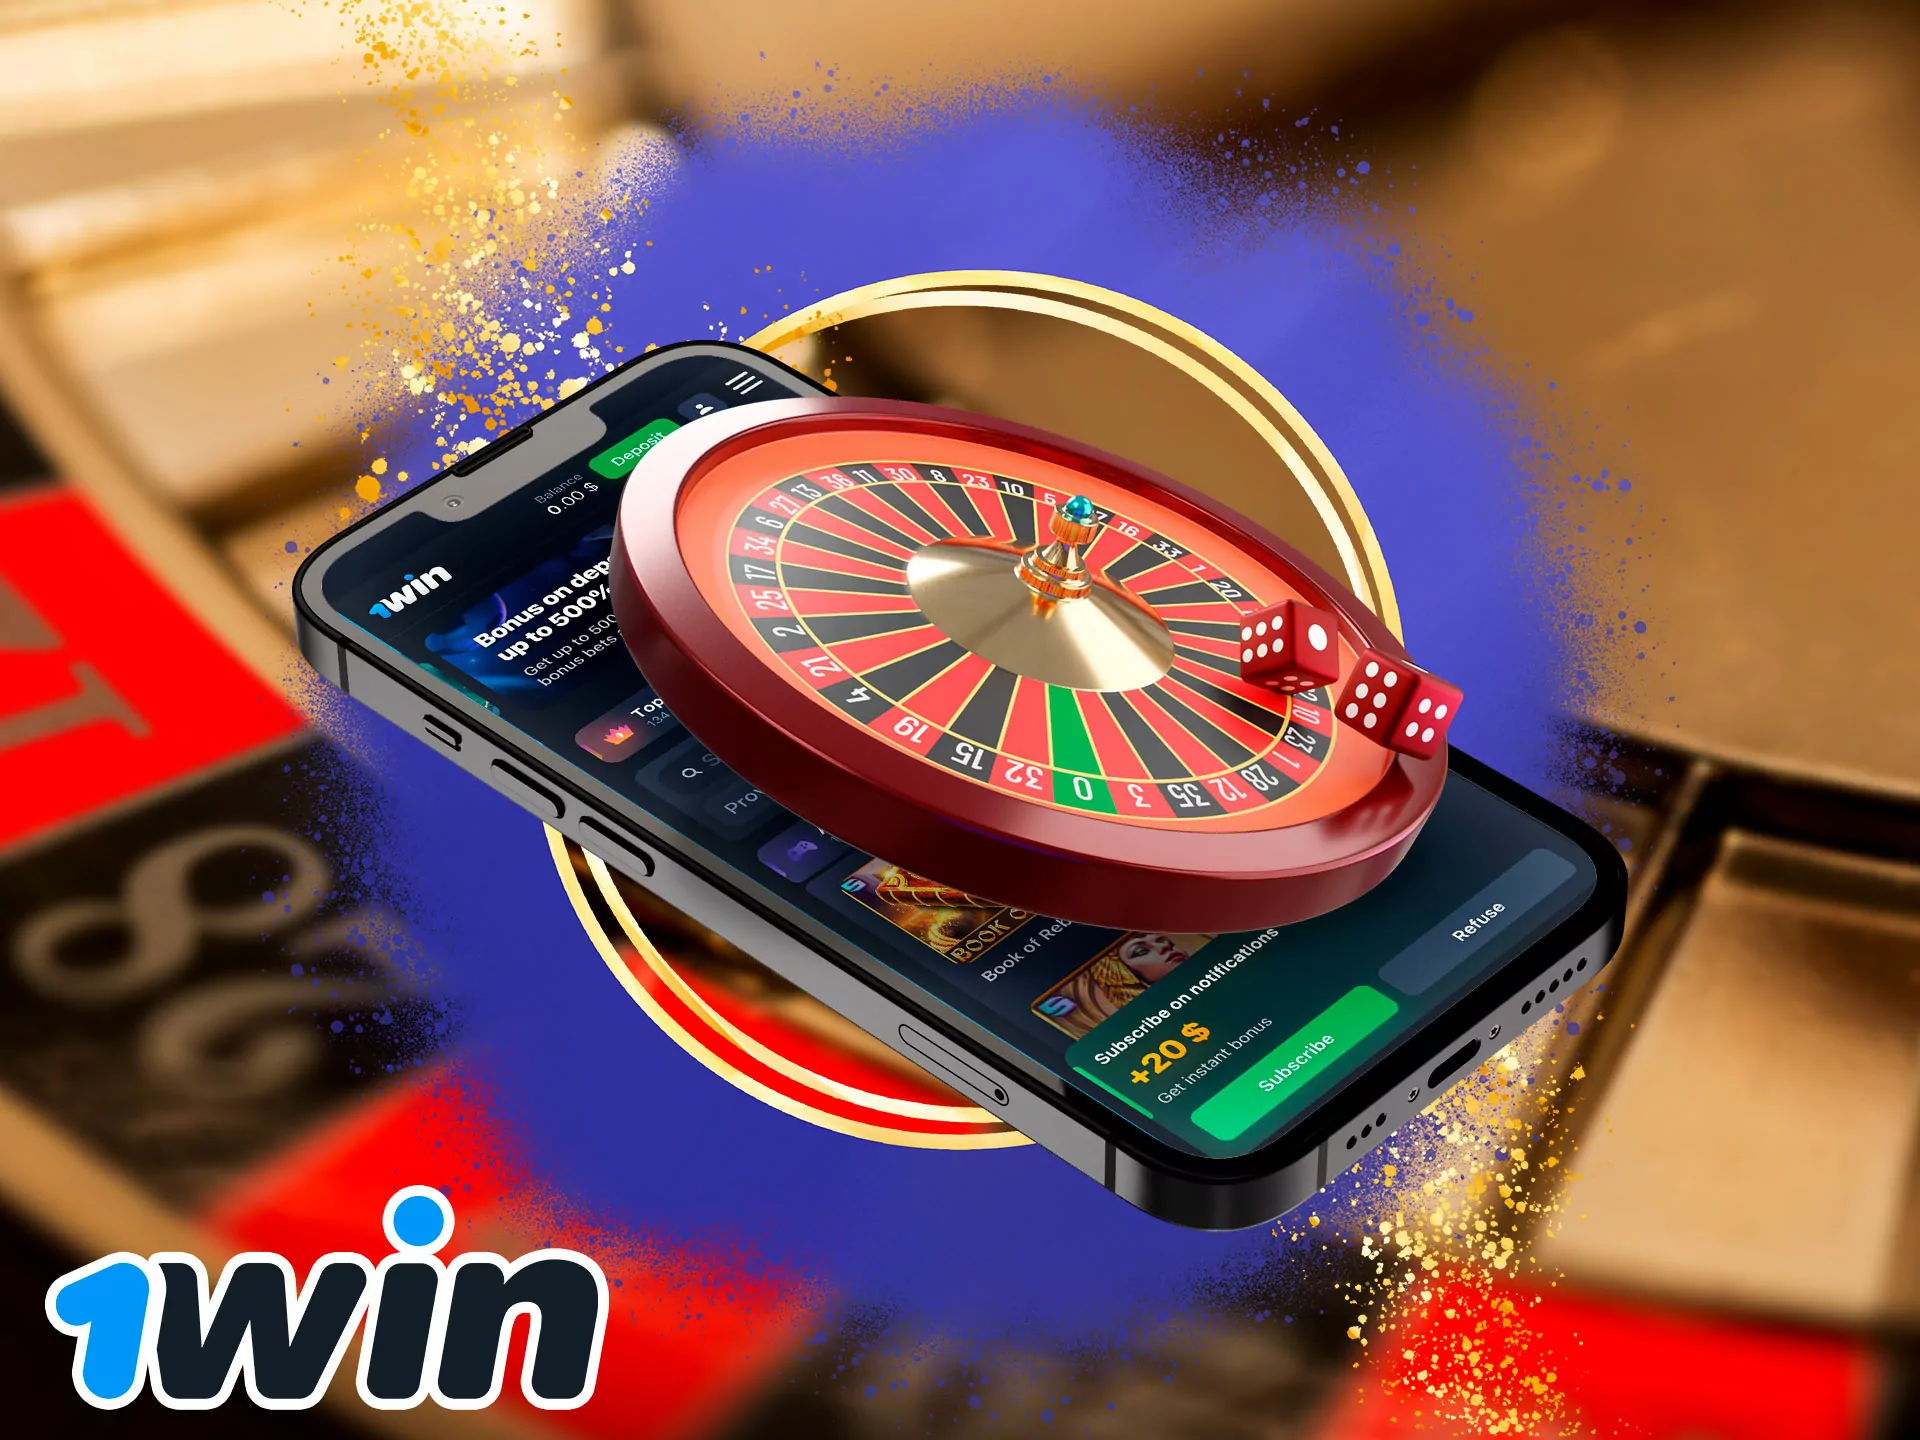 This game is available in almost any casino, the player closely follows the spinning wheel, because the winnings depend on the number on the scale where the ball stops.